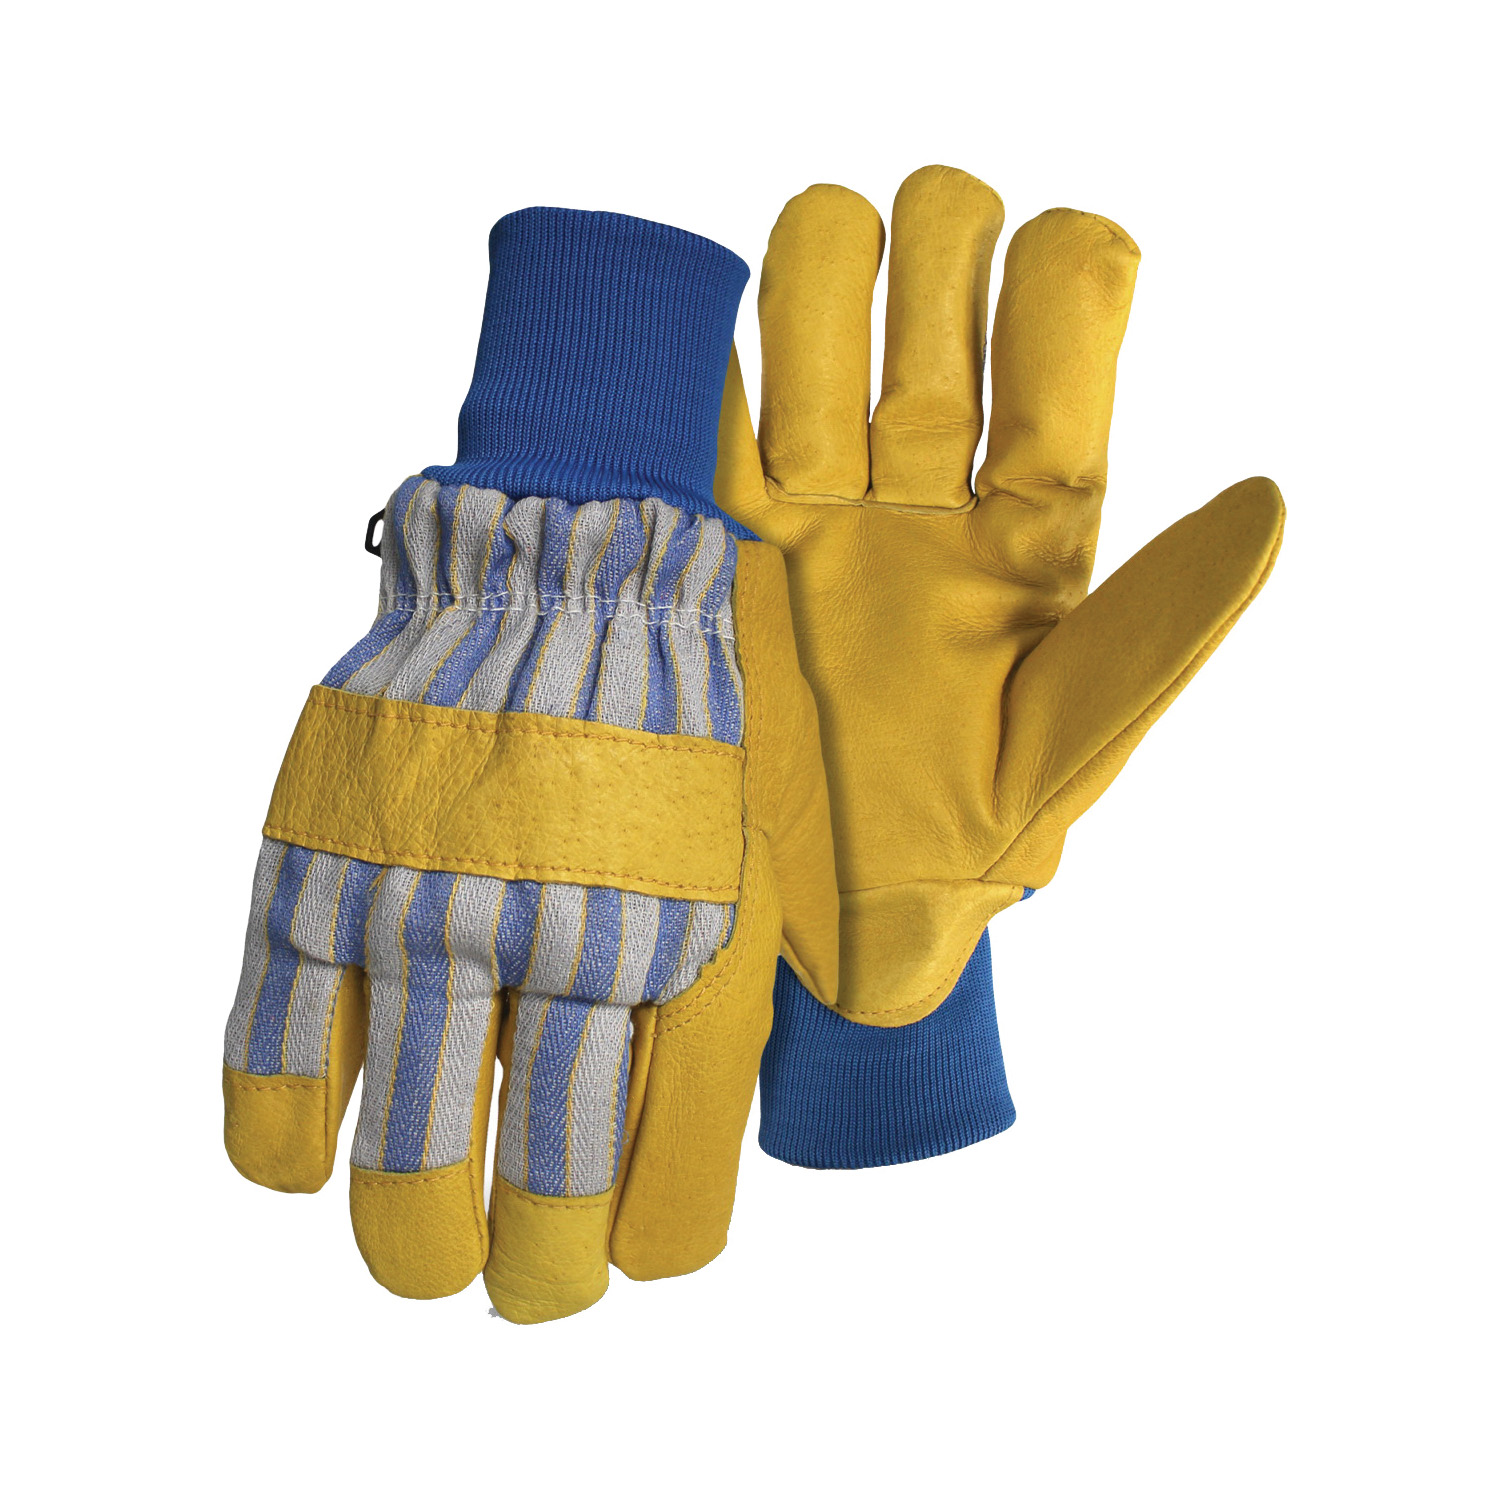 4341XL Gloves, XL, Wing Thumb, Knit Wrist Cuff, Cotton Back, Polyester Lining